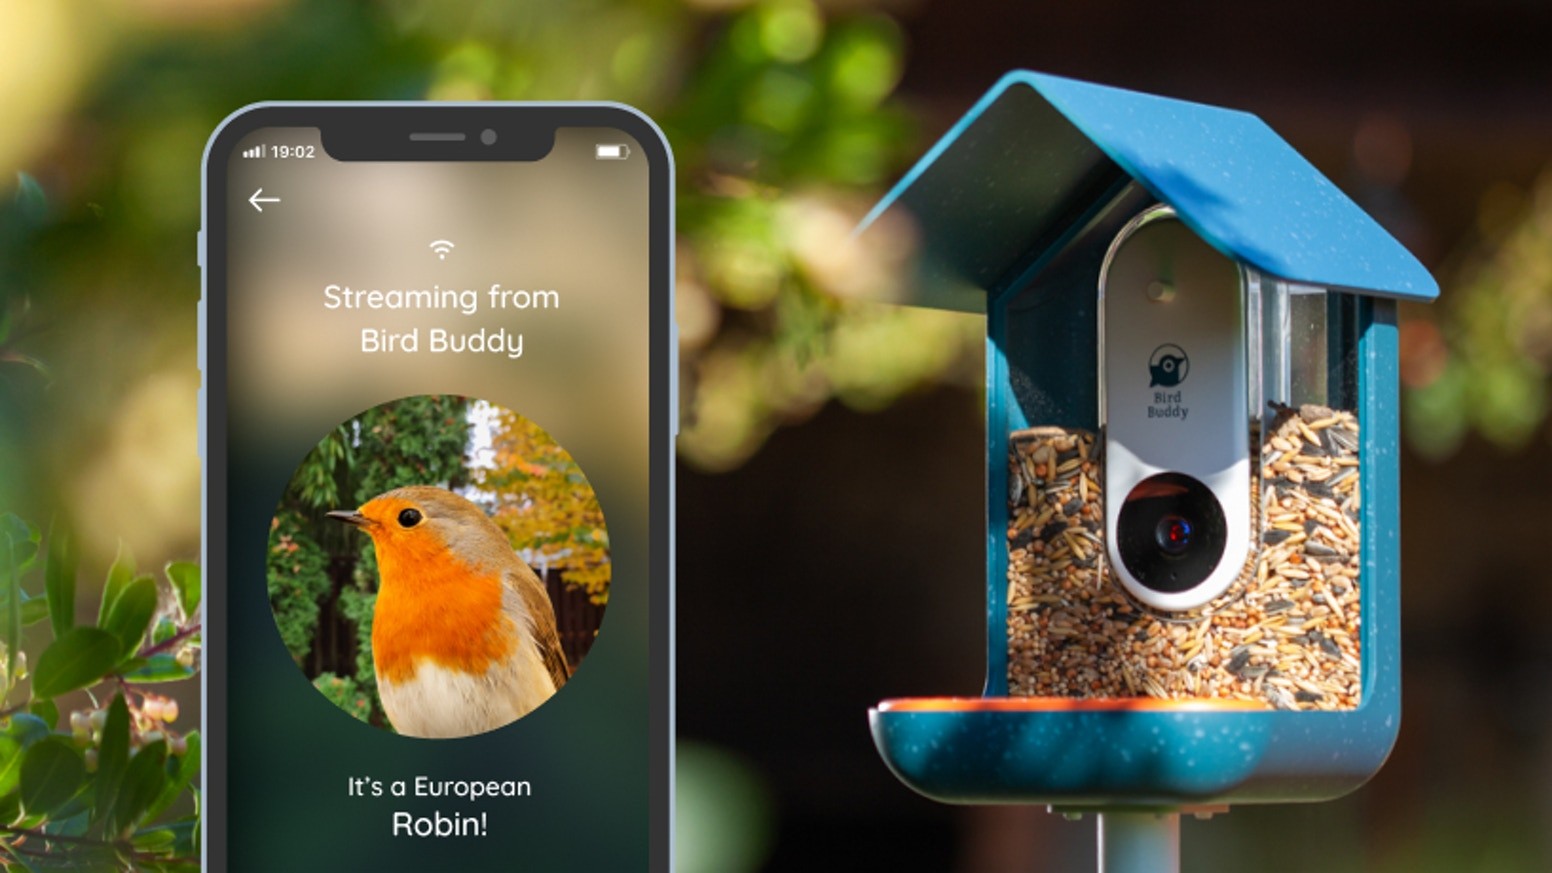 The Bird Buddy app notifies the owner when the bird has run out of food (Photo: Bird Buddy/Reproduction)